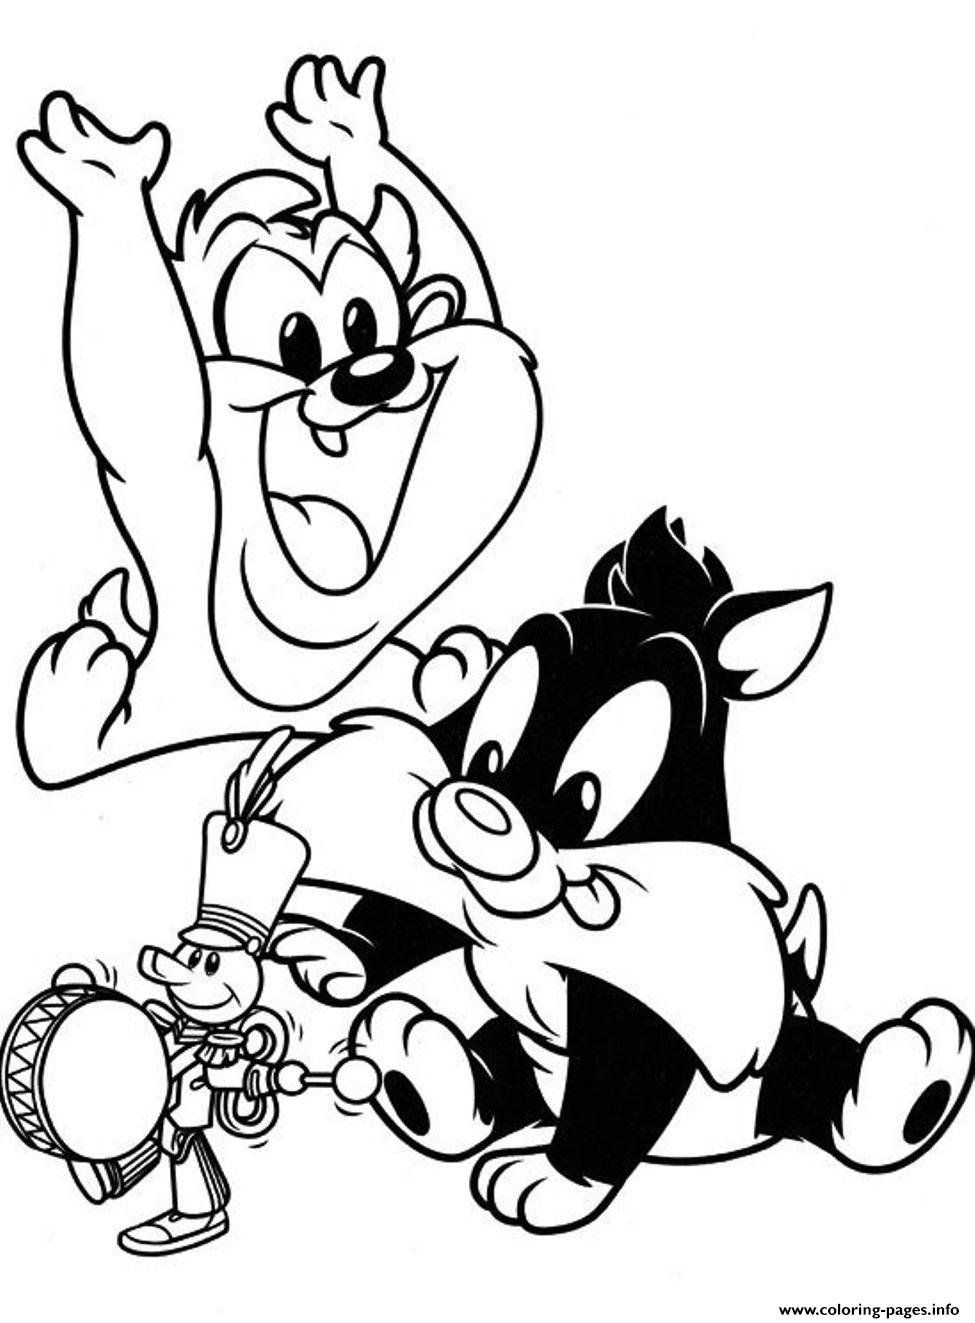 Baby Looney Tunes Cartoon S For Kids11b7 coloring pages